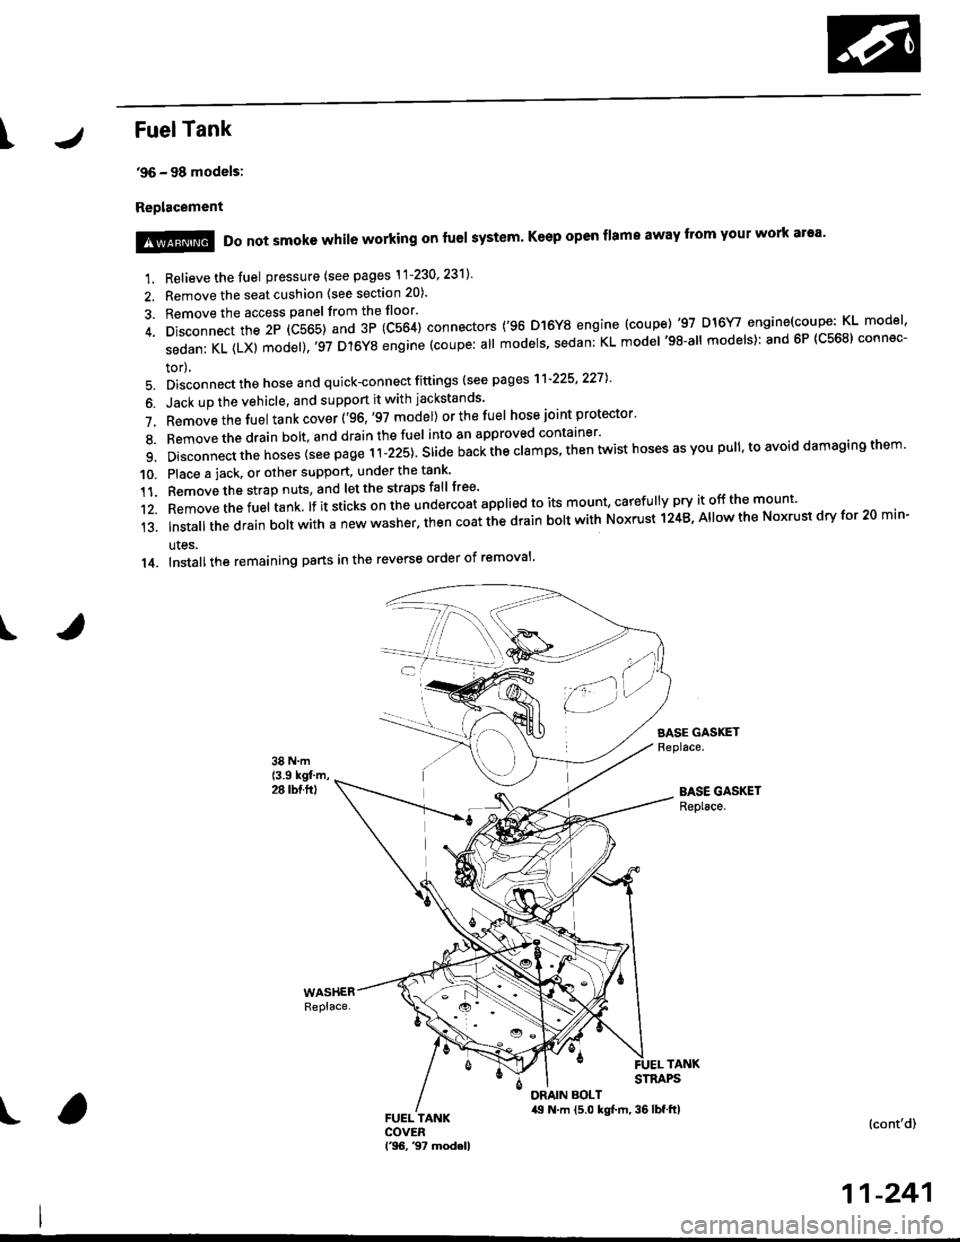 HONDA CIVIC 1996 6.G Workshop Manual IFuelTank
96 - 98 models:
Replacement
I
1. Relieve the fuel pressure (see pages \1-230 23ll
2. Remove the seat cushion (see section 20).
3. Remove the access panel from the floor
4. Disconnect th